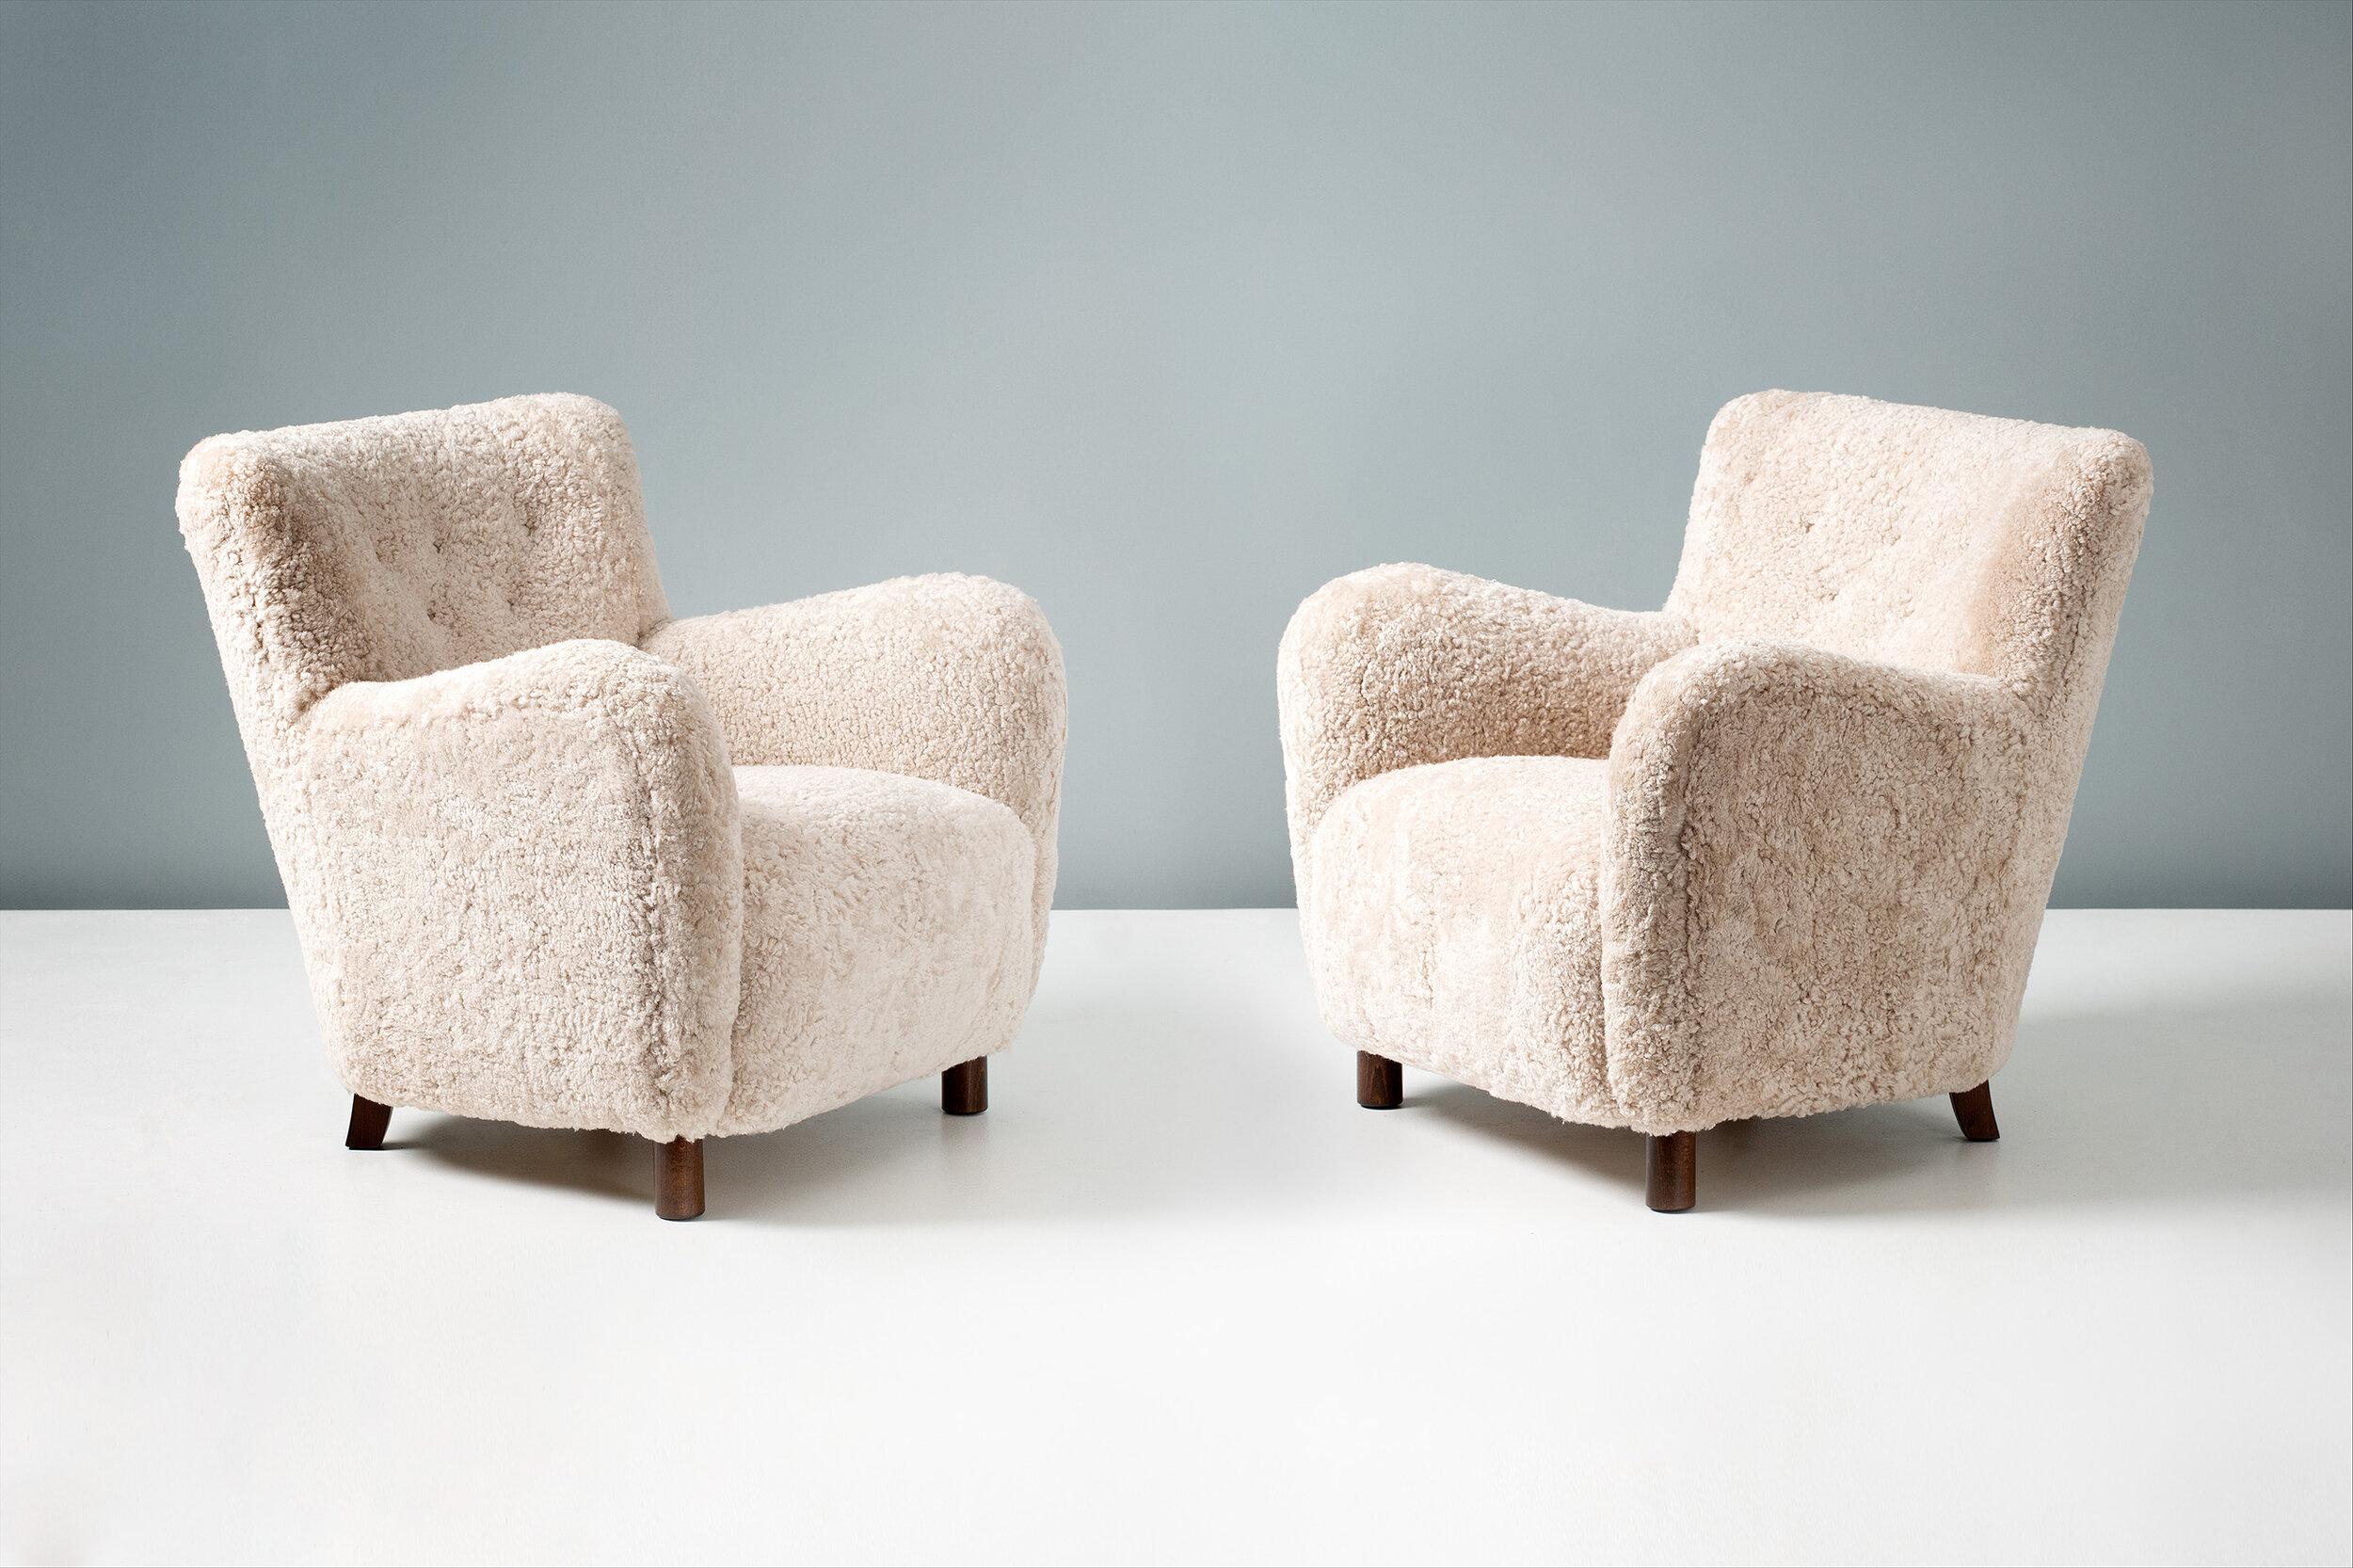 Pair of Custom Made Sheepskin Lounge Chairs In New Condition For Sale In London, England